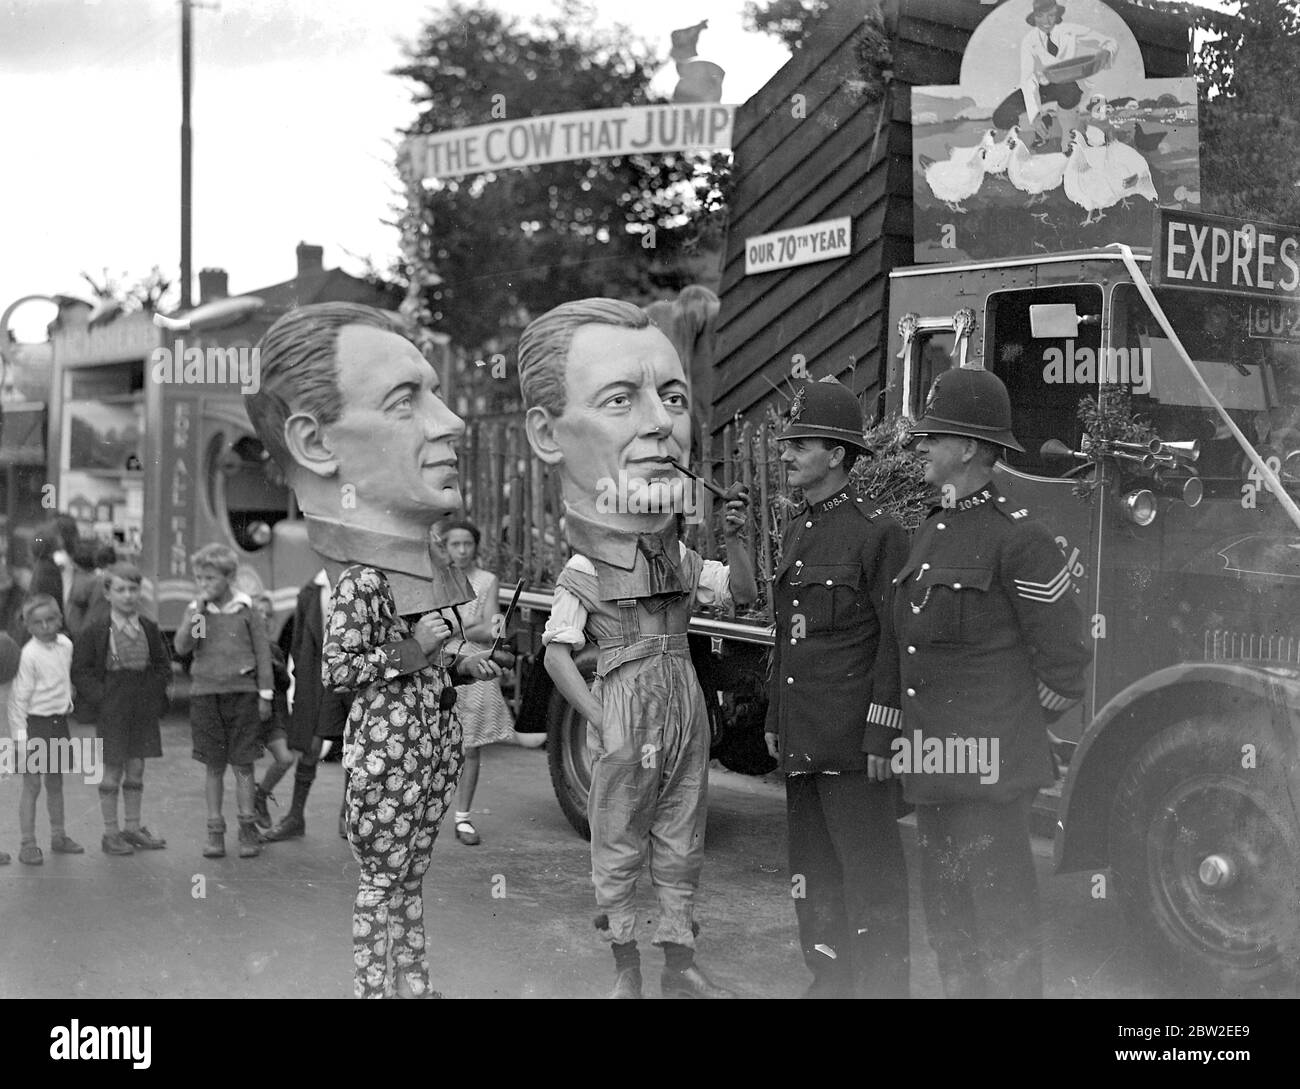 Eltham Carnival in Kent. Policemen talking with the Big Heads. 1934 Stock Photo